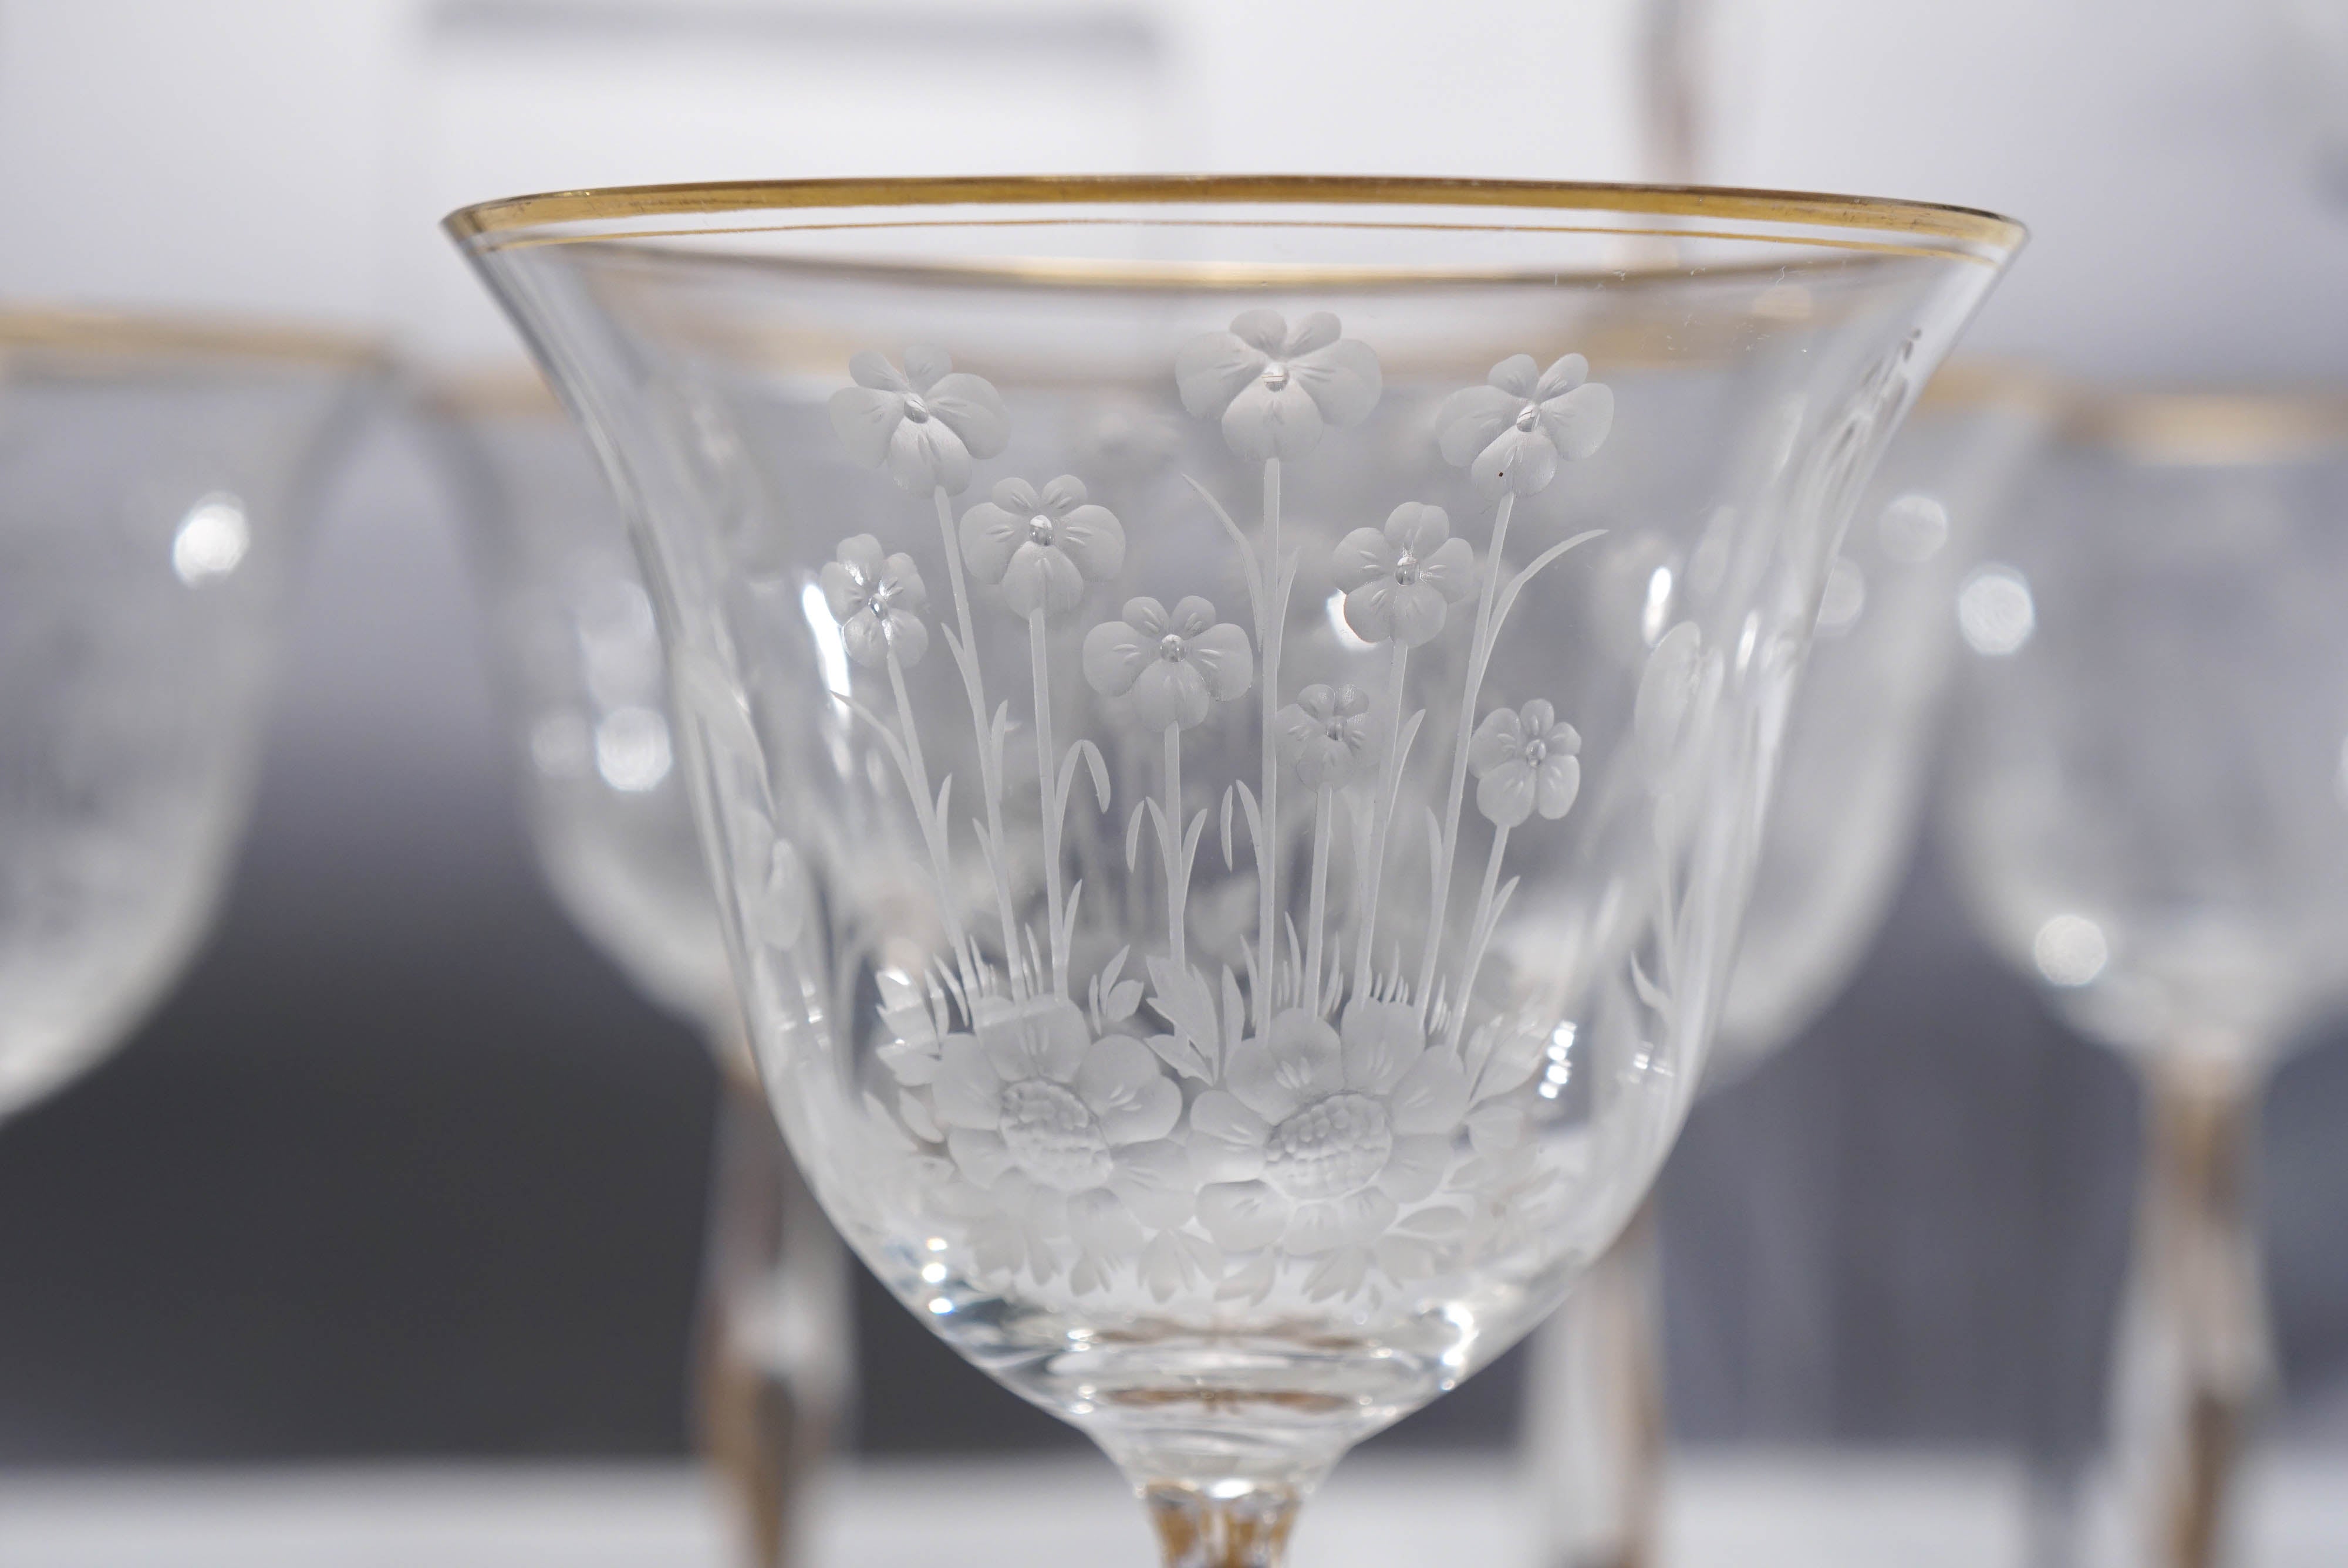 10 Hand Blown Crystal Mousseline Goblets Wine w/ Intaglio Cut Floral Decoration In Excellent Condition For Sale In Great Barrington, MA